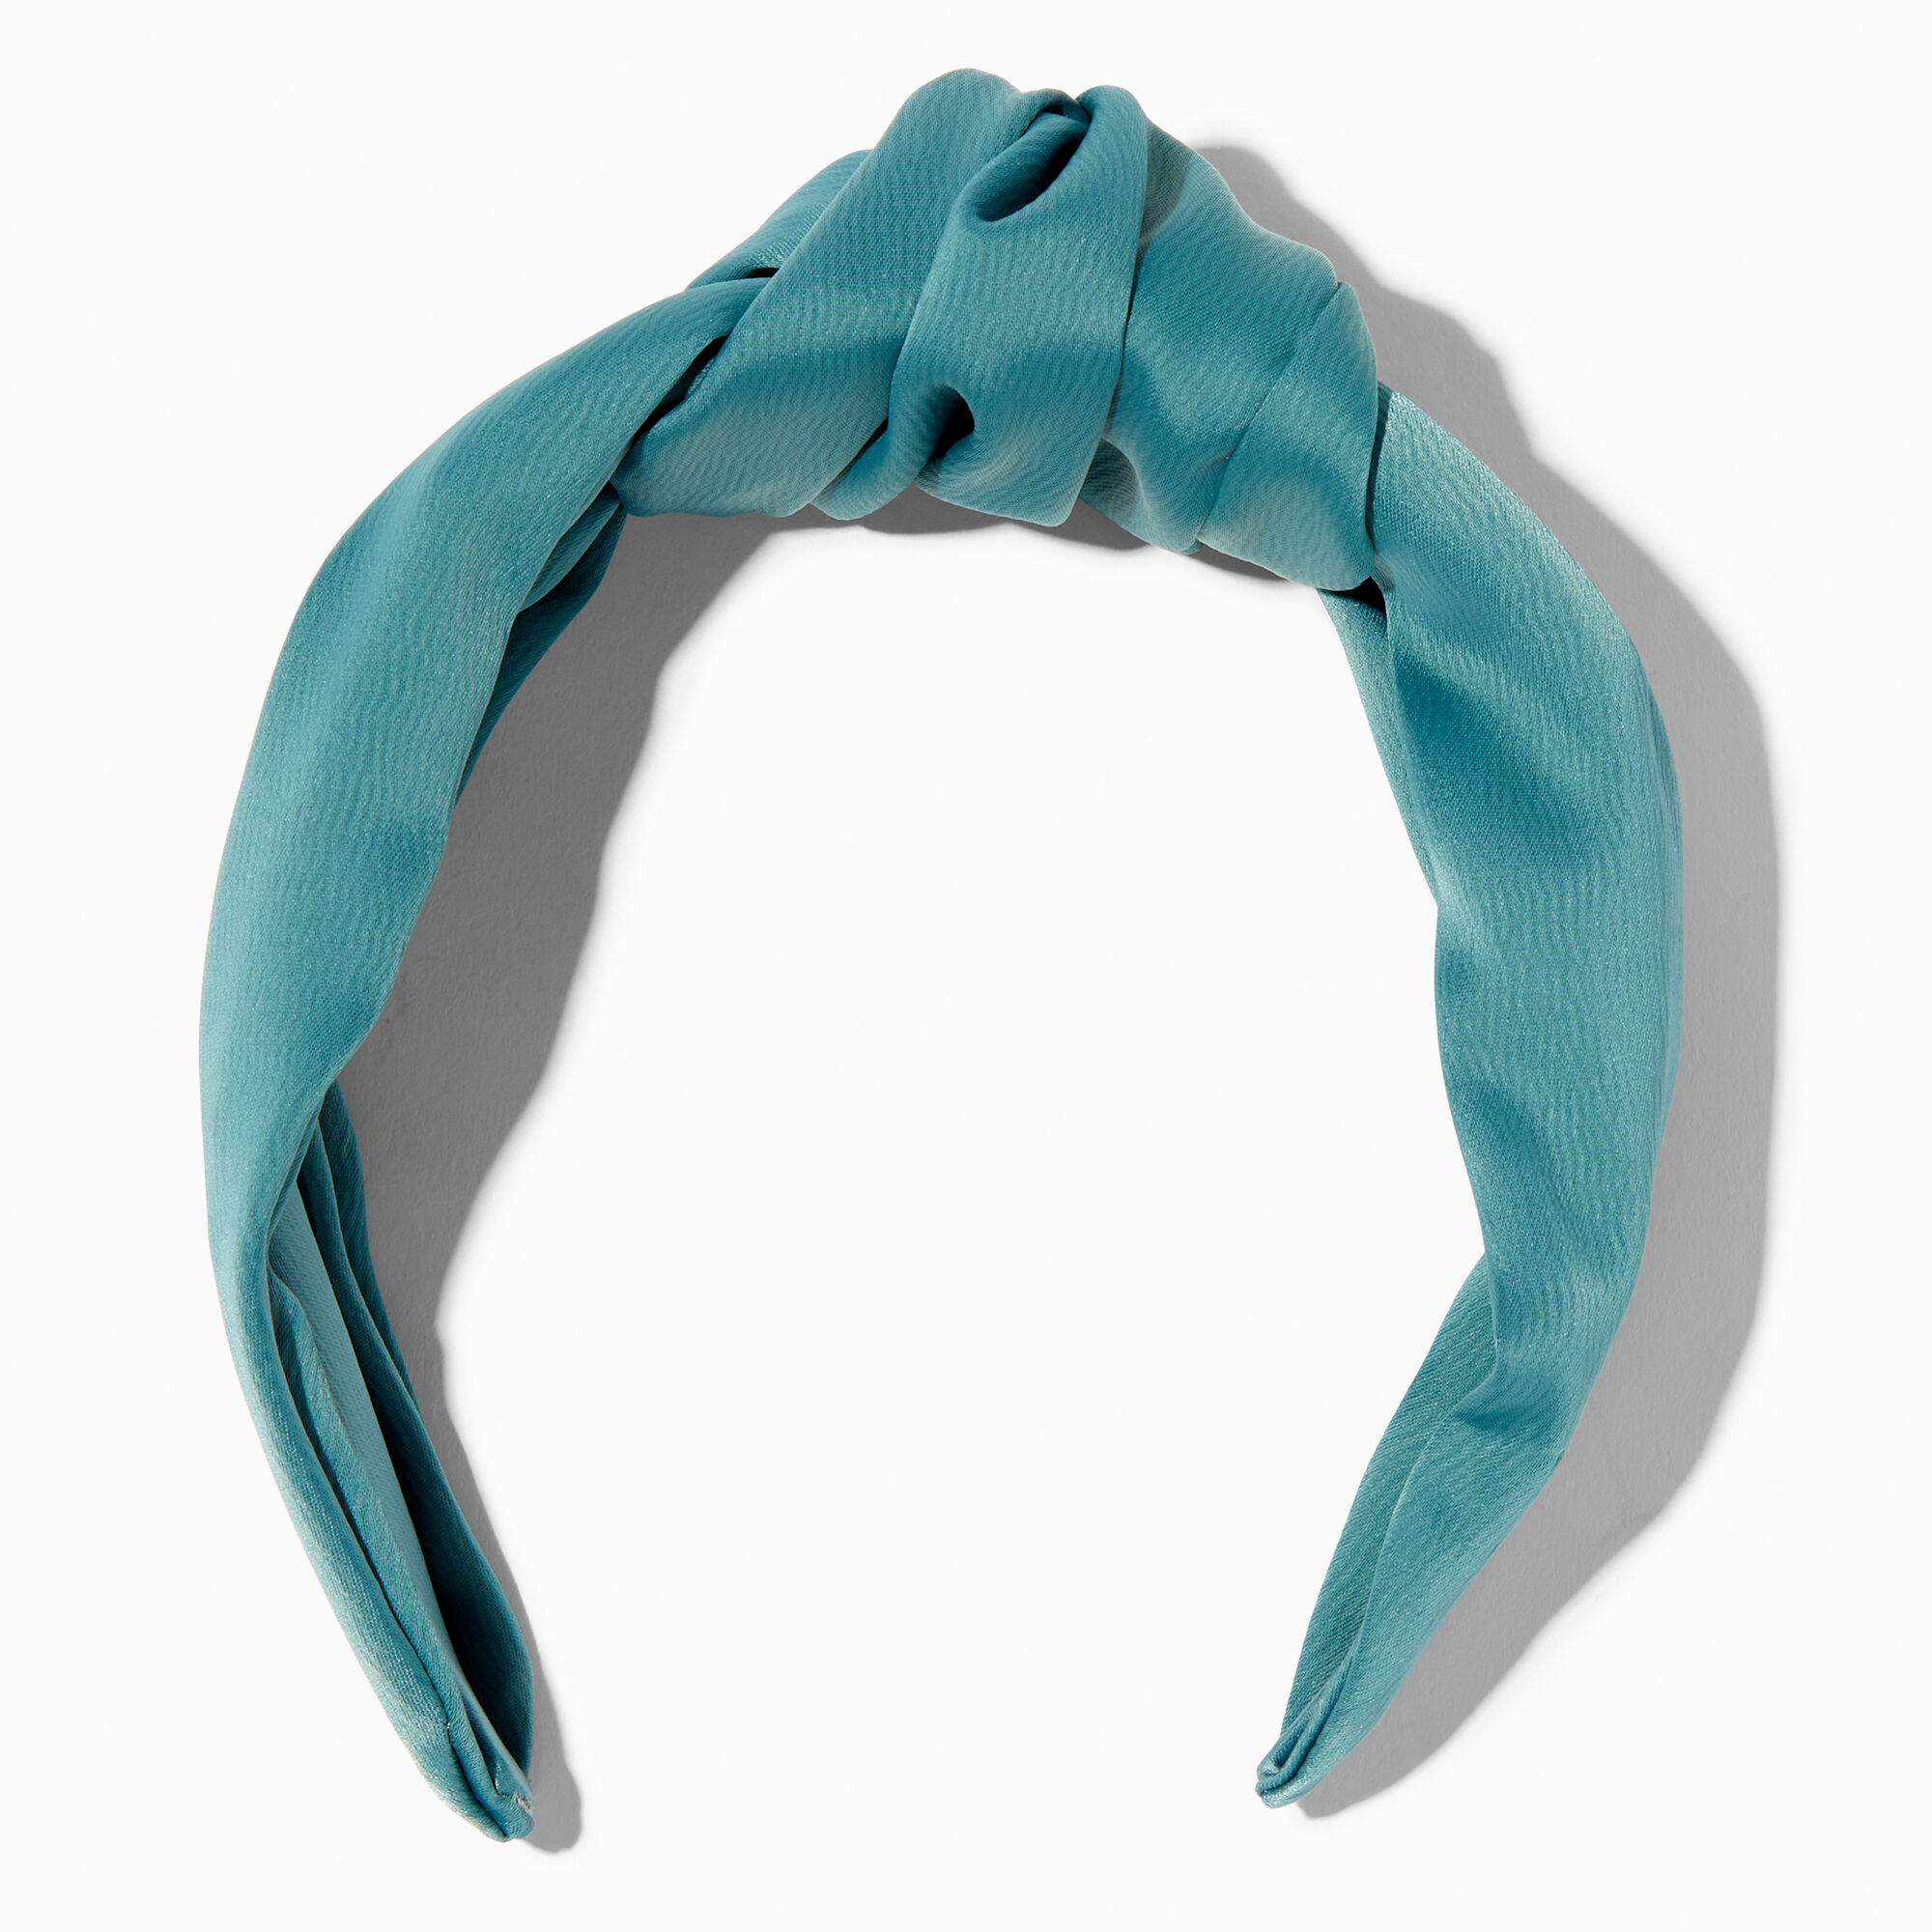 View Claires Satin Knotted Headband Teal information